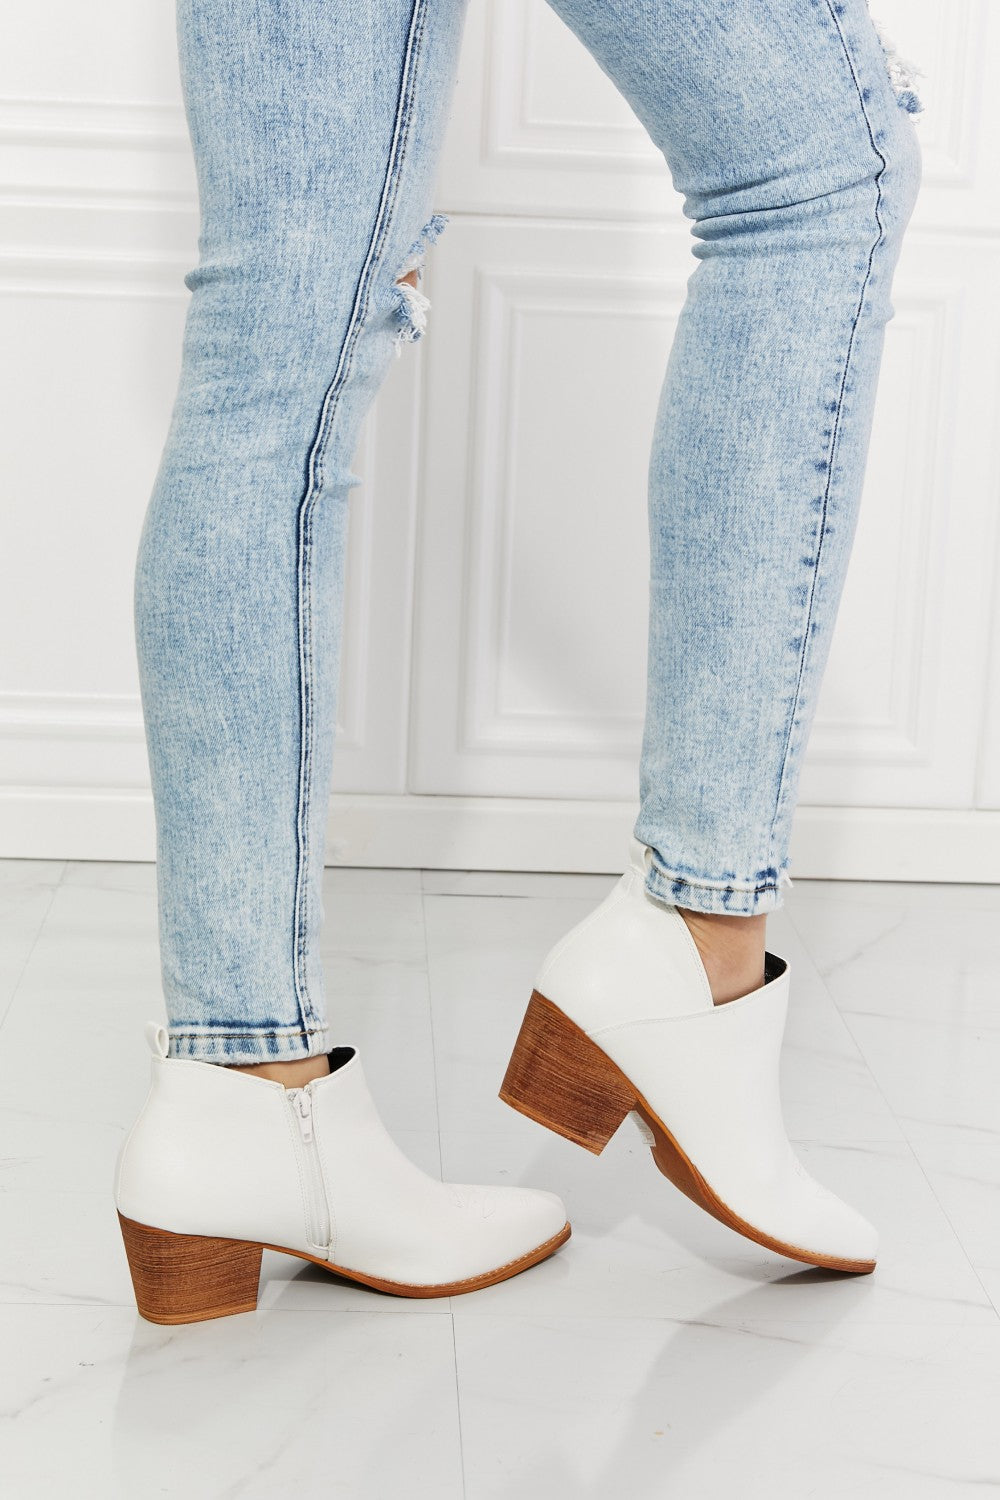 Trusty2 - Embroidered Crossover Cowboy Bootie in White